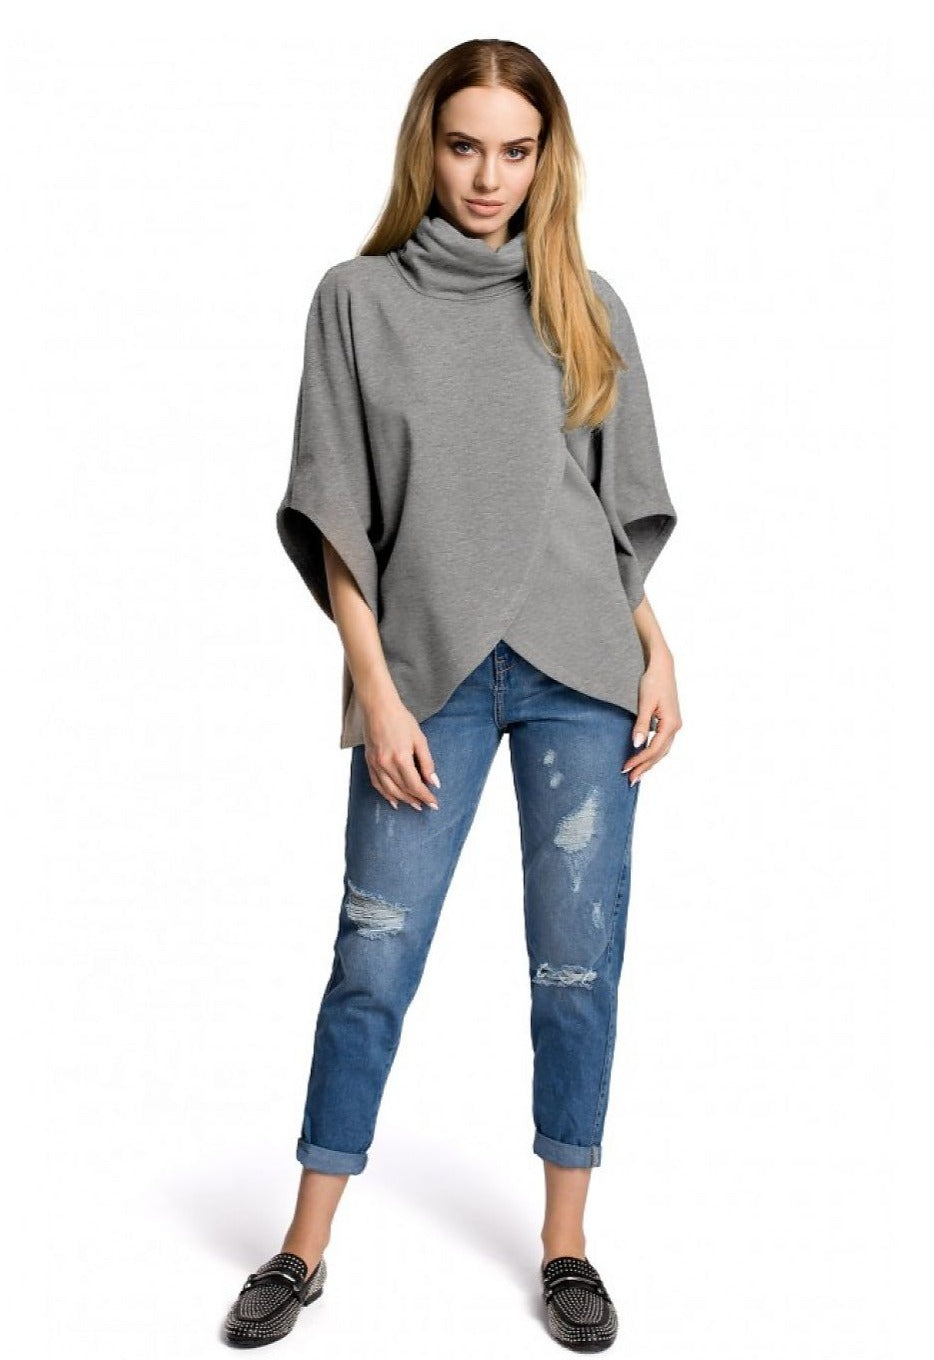 Comfortable Turtleneck Poncho Knitted Top